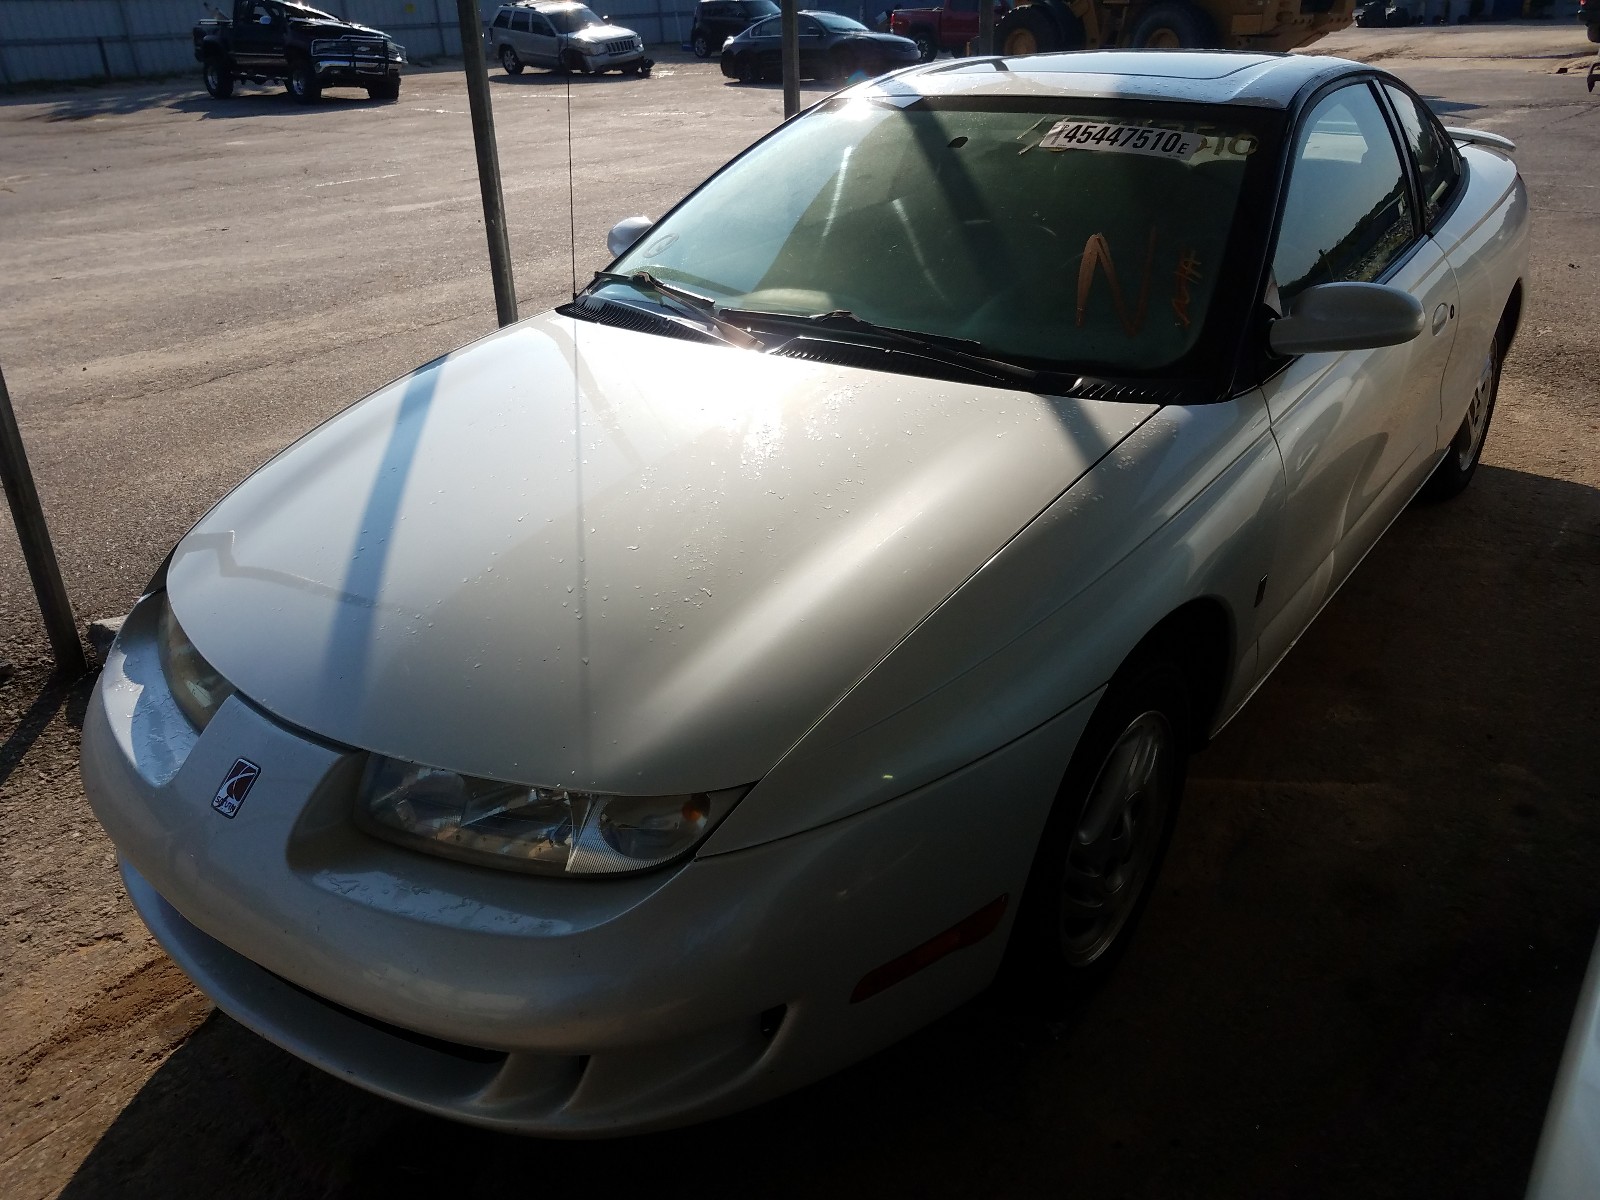 1998 saturn sc2 for sale at copart gaston sc lot 45447510 salvagereseller com salvagereseller com